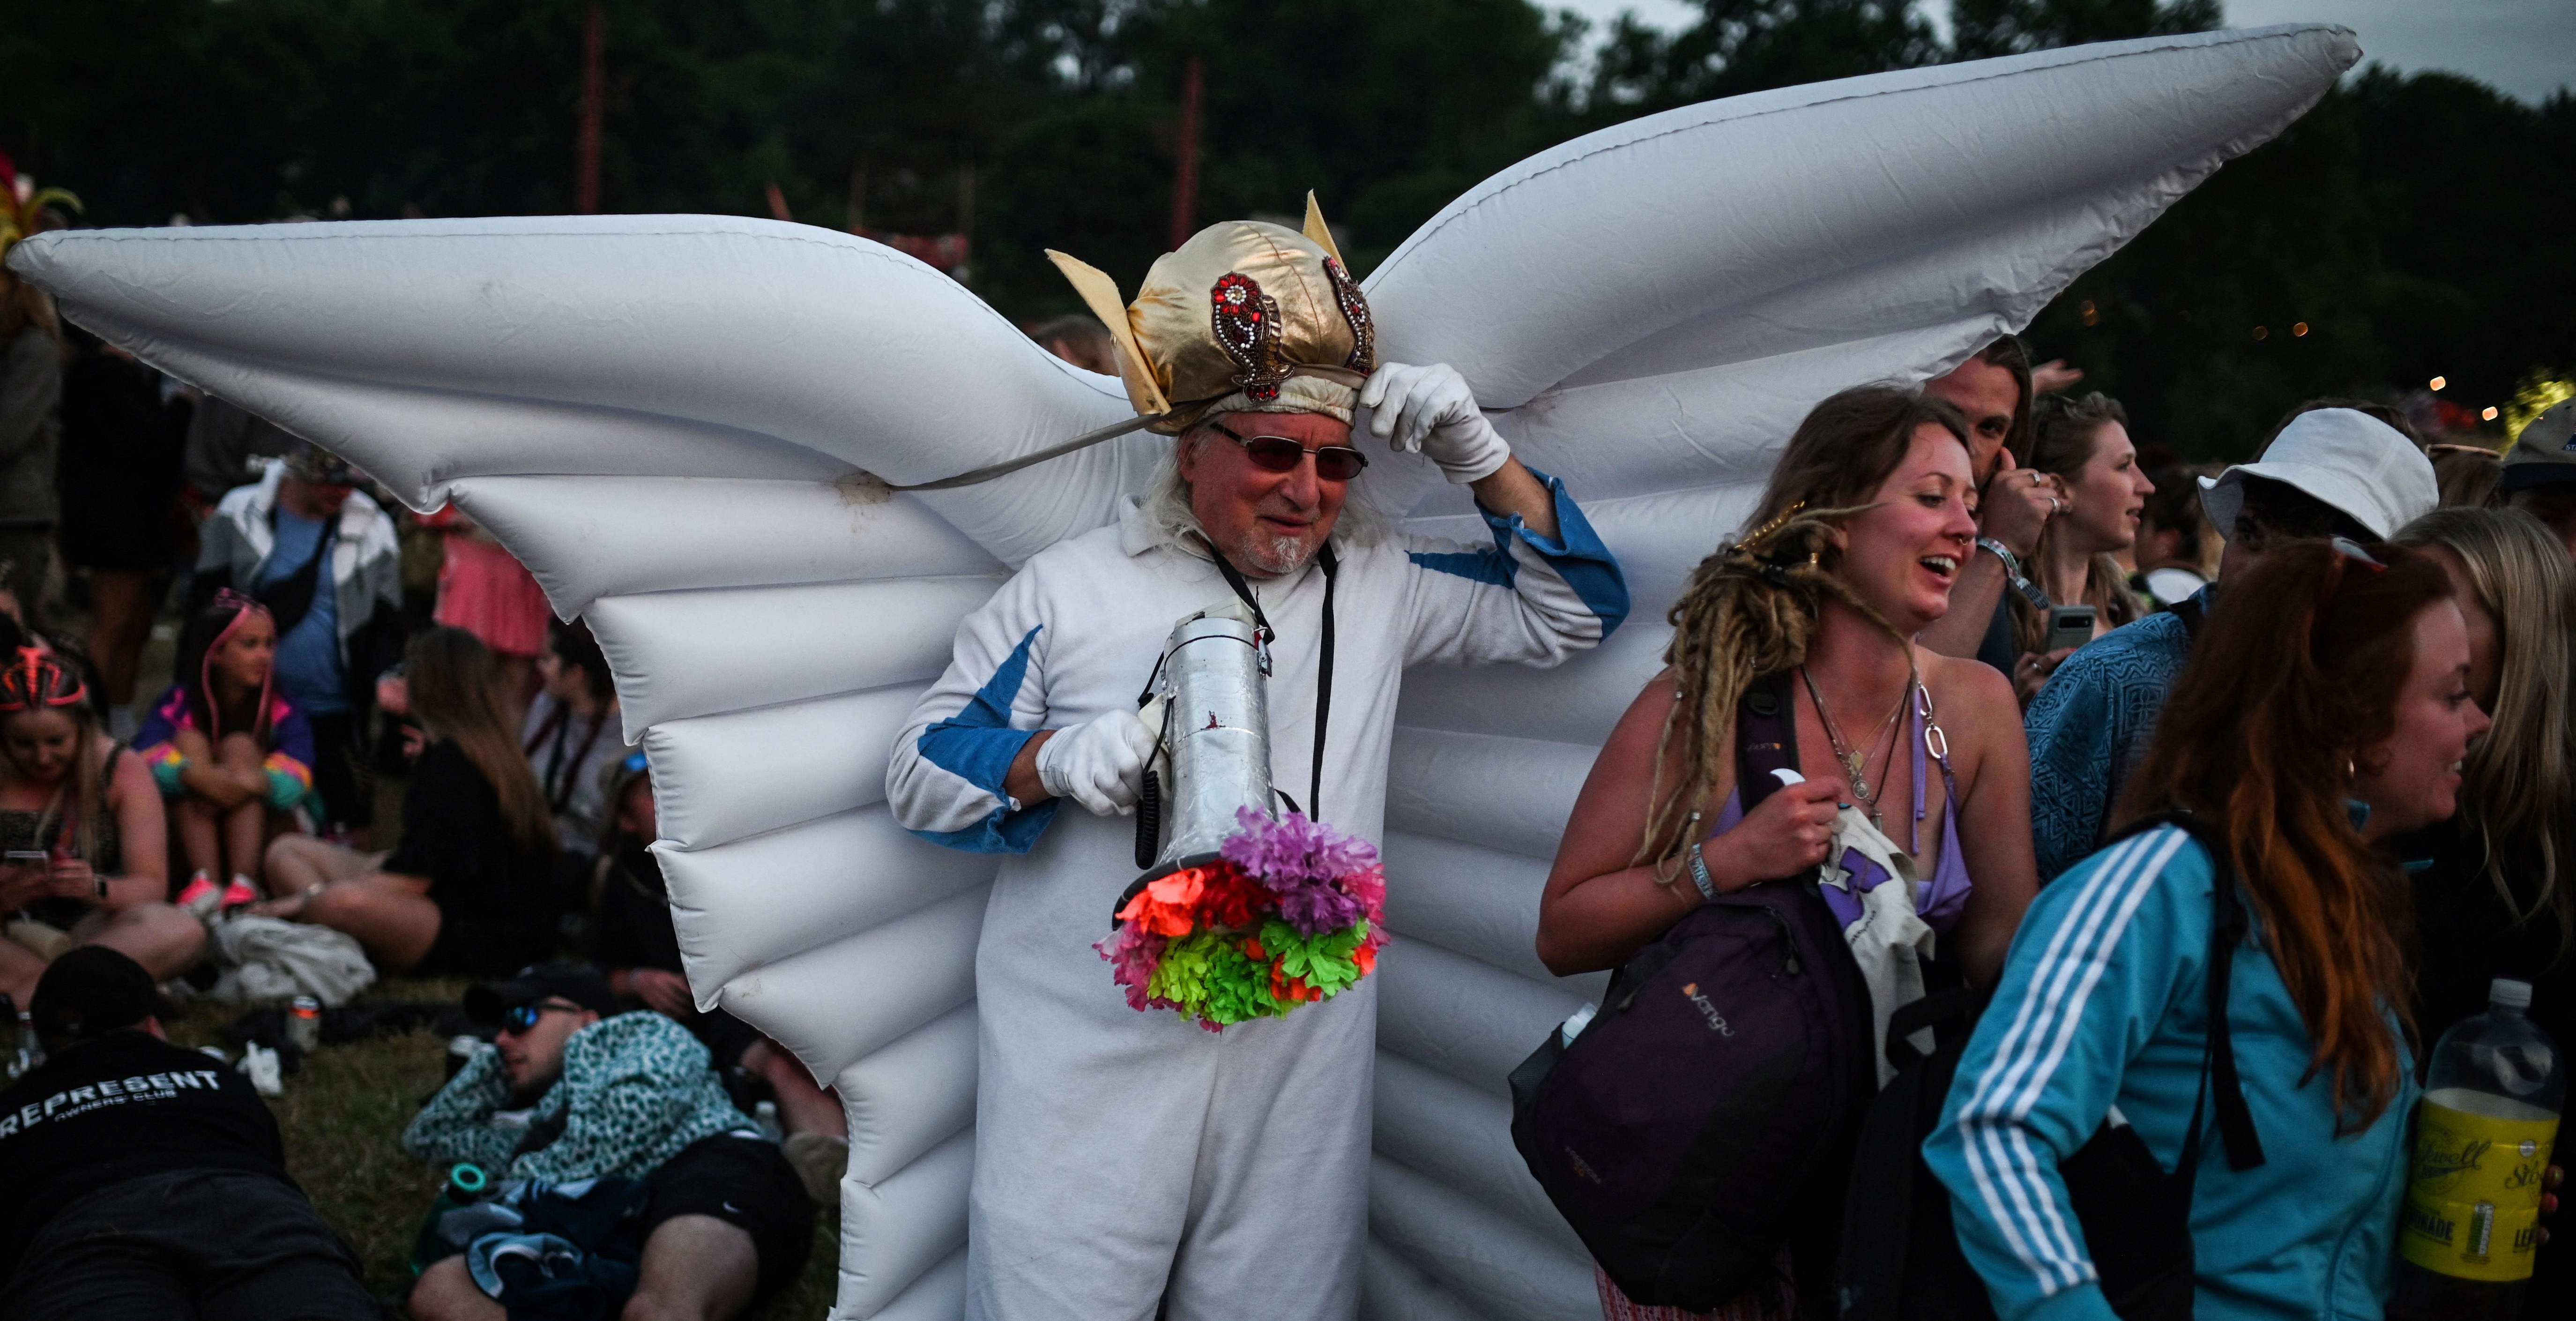 A festival goer wearing inflatable wings walks among the crowd during the first day of the Glastonbury festival